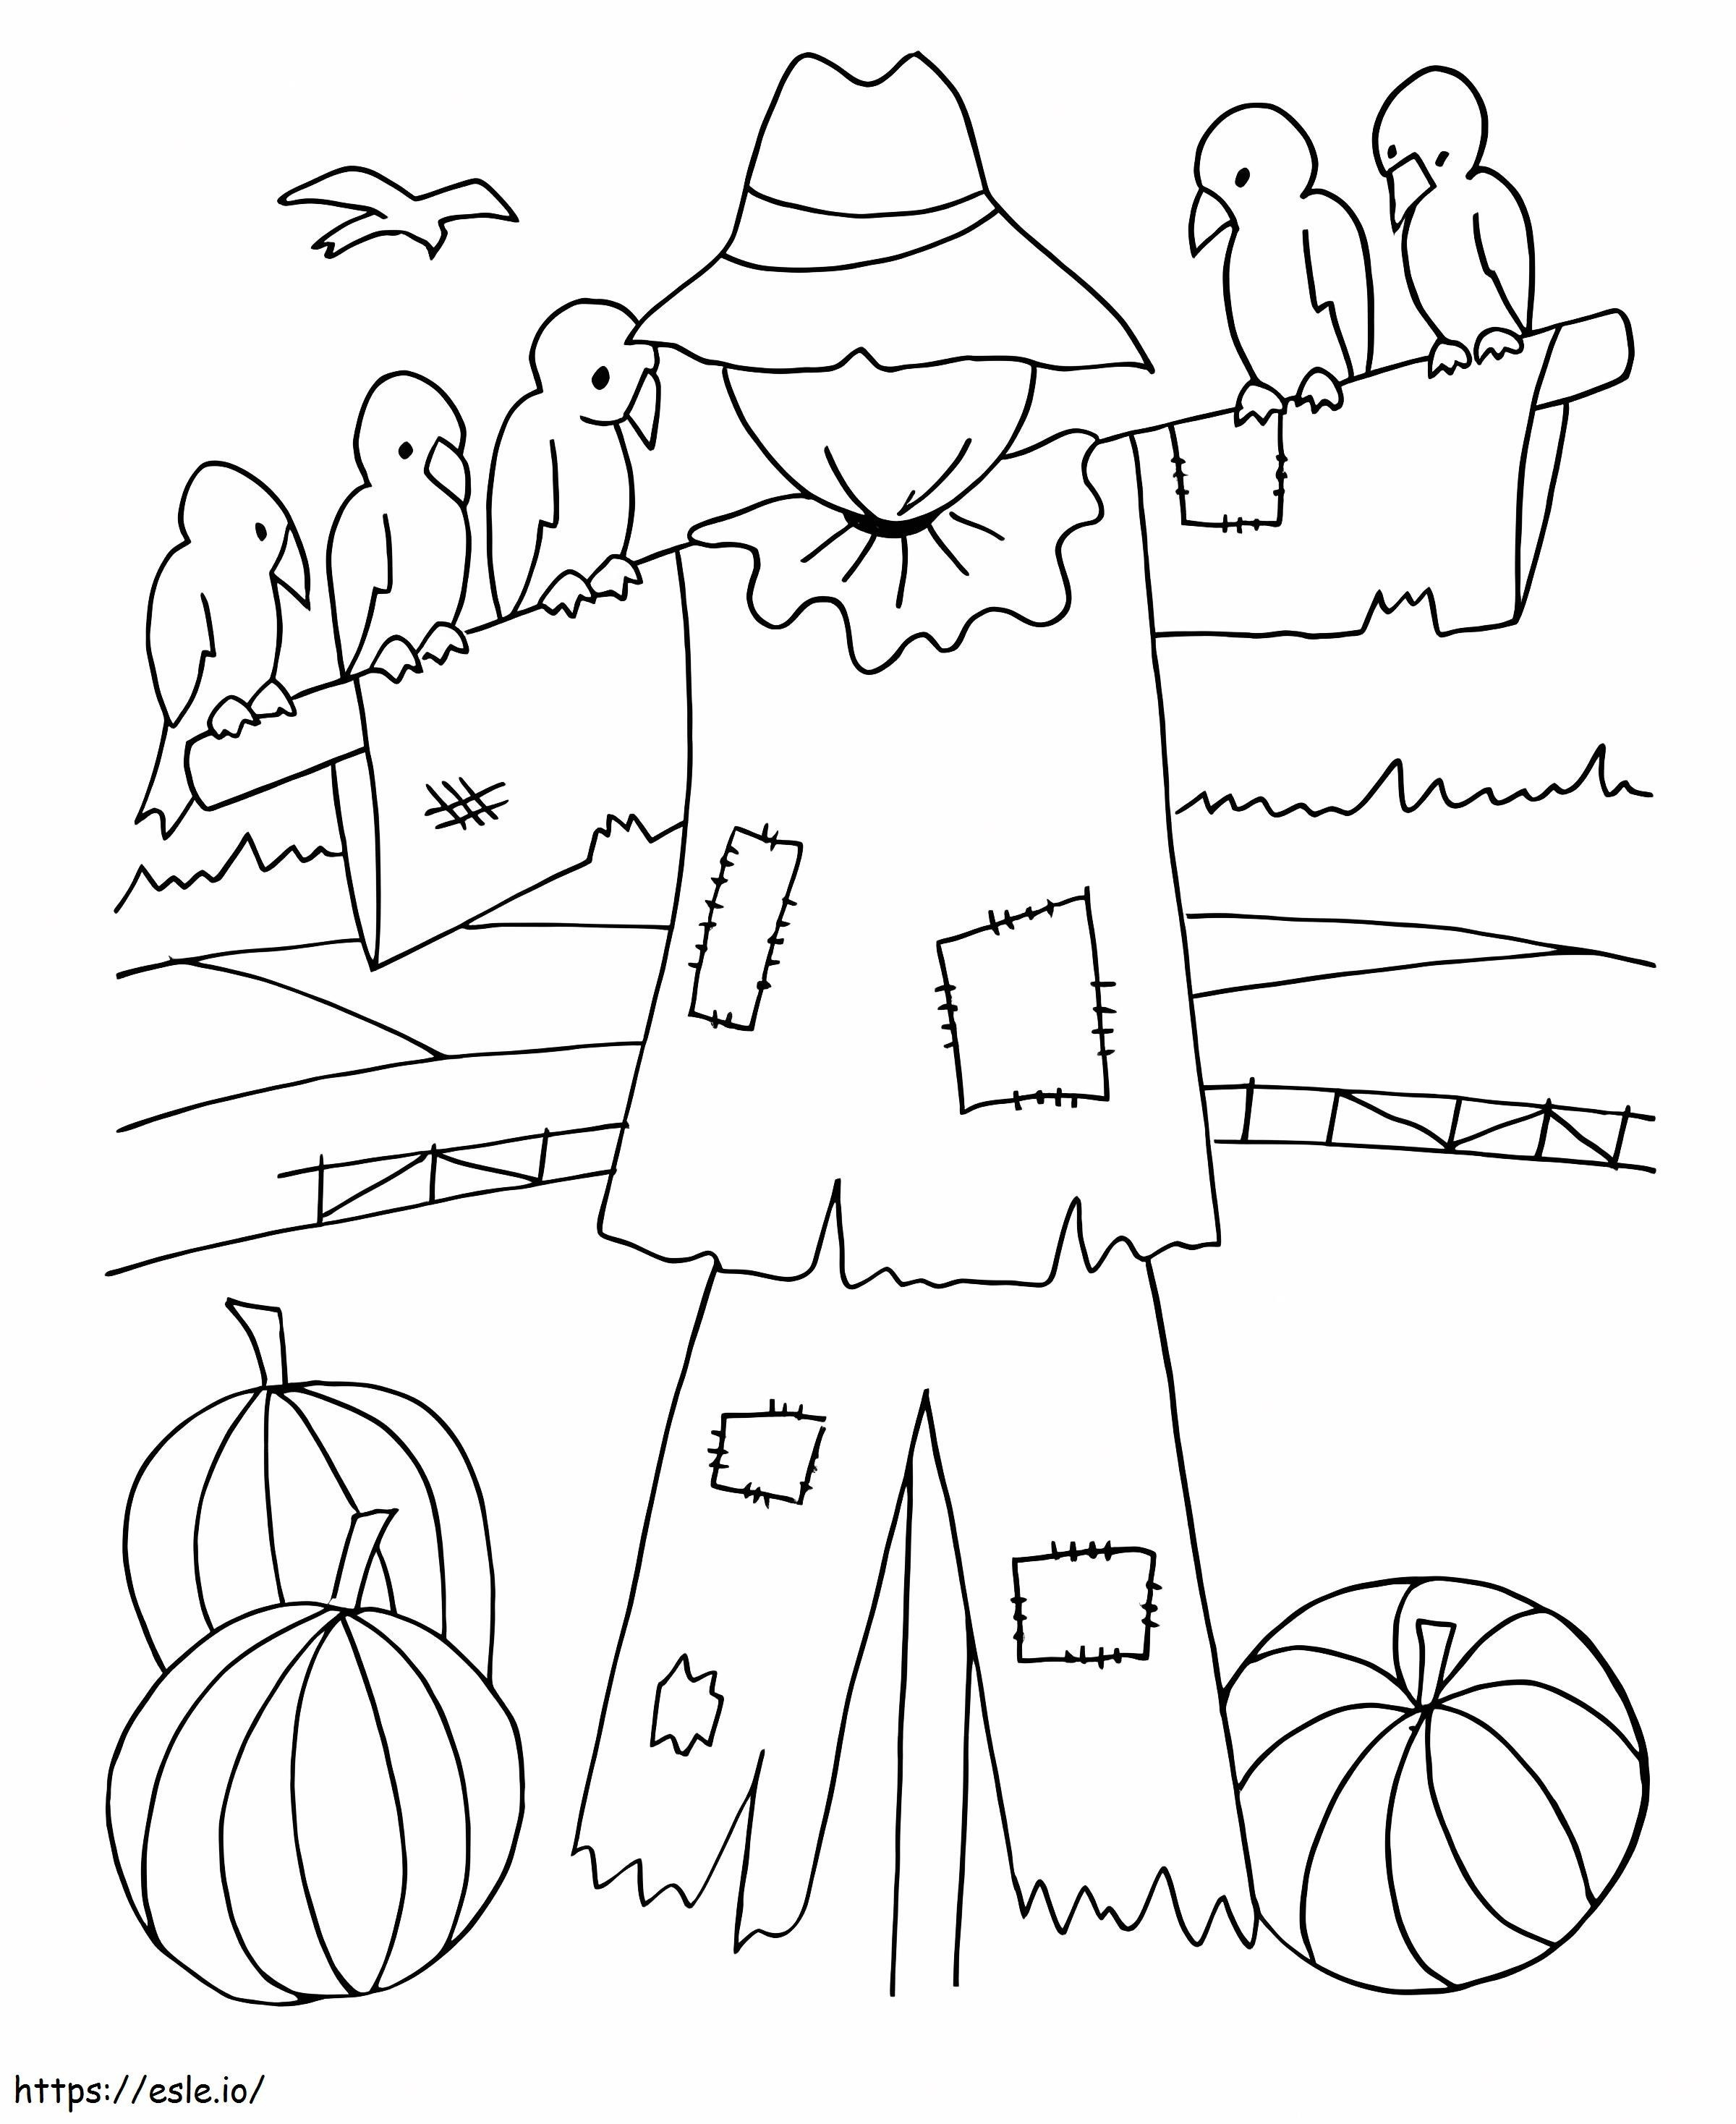 Good Scarecrow coloring page